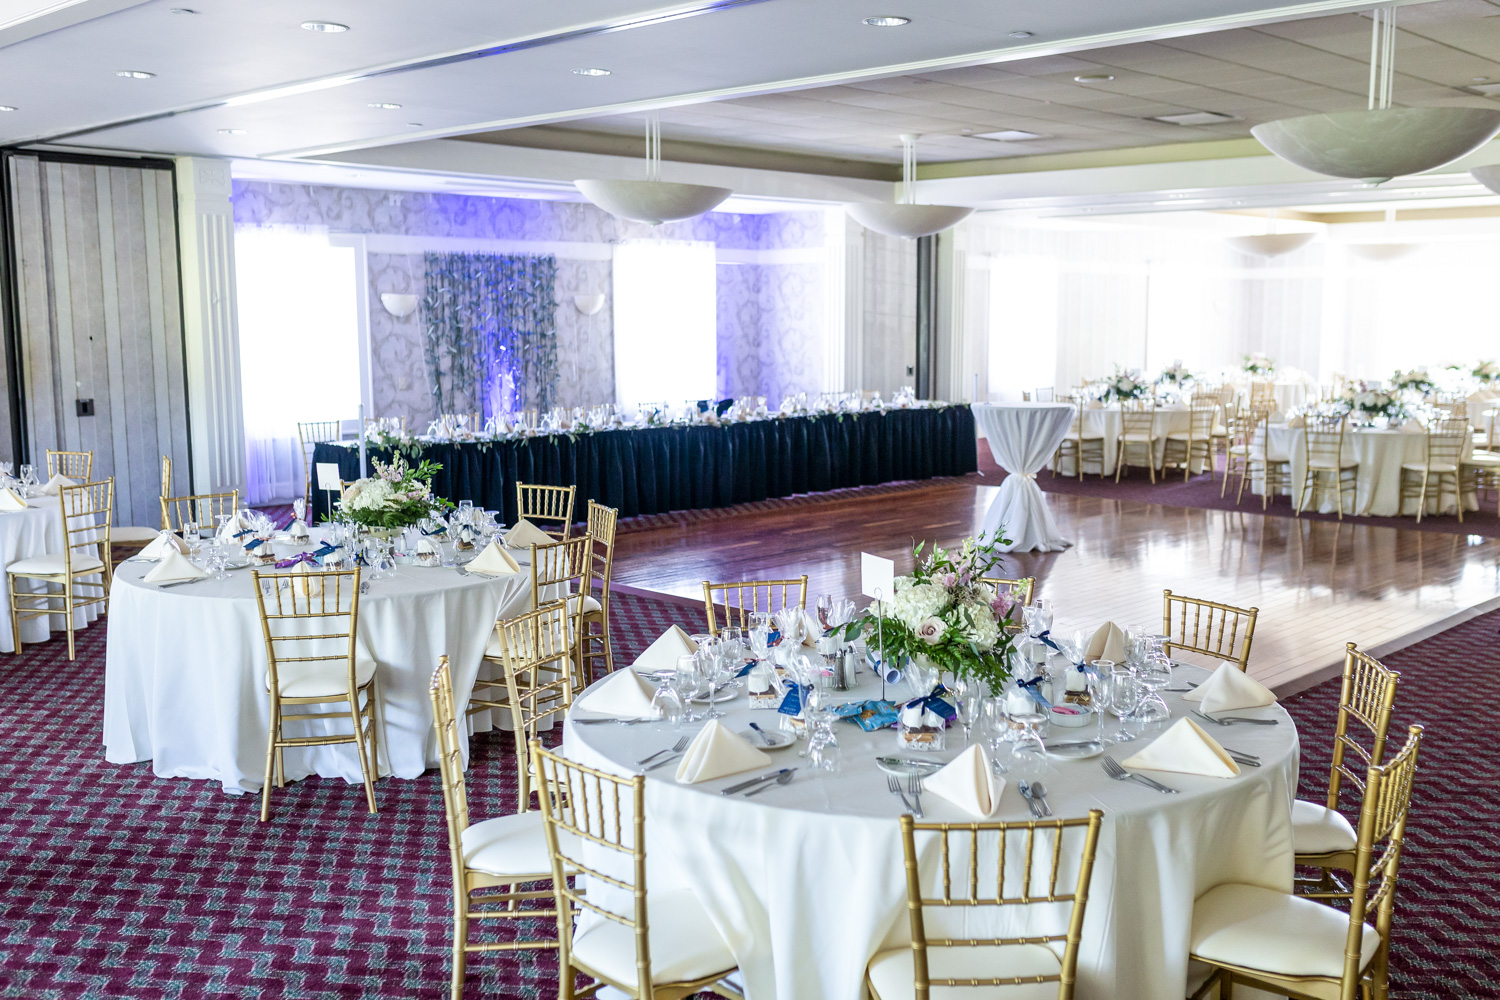 View of the dining area for a wedding reception. Each table is decorated with white tableware.